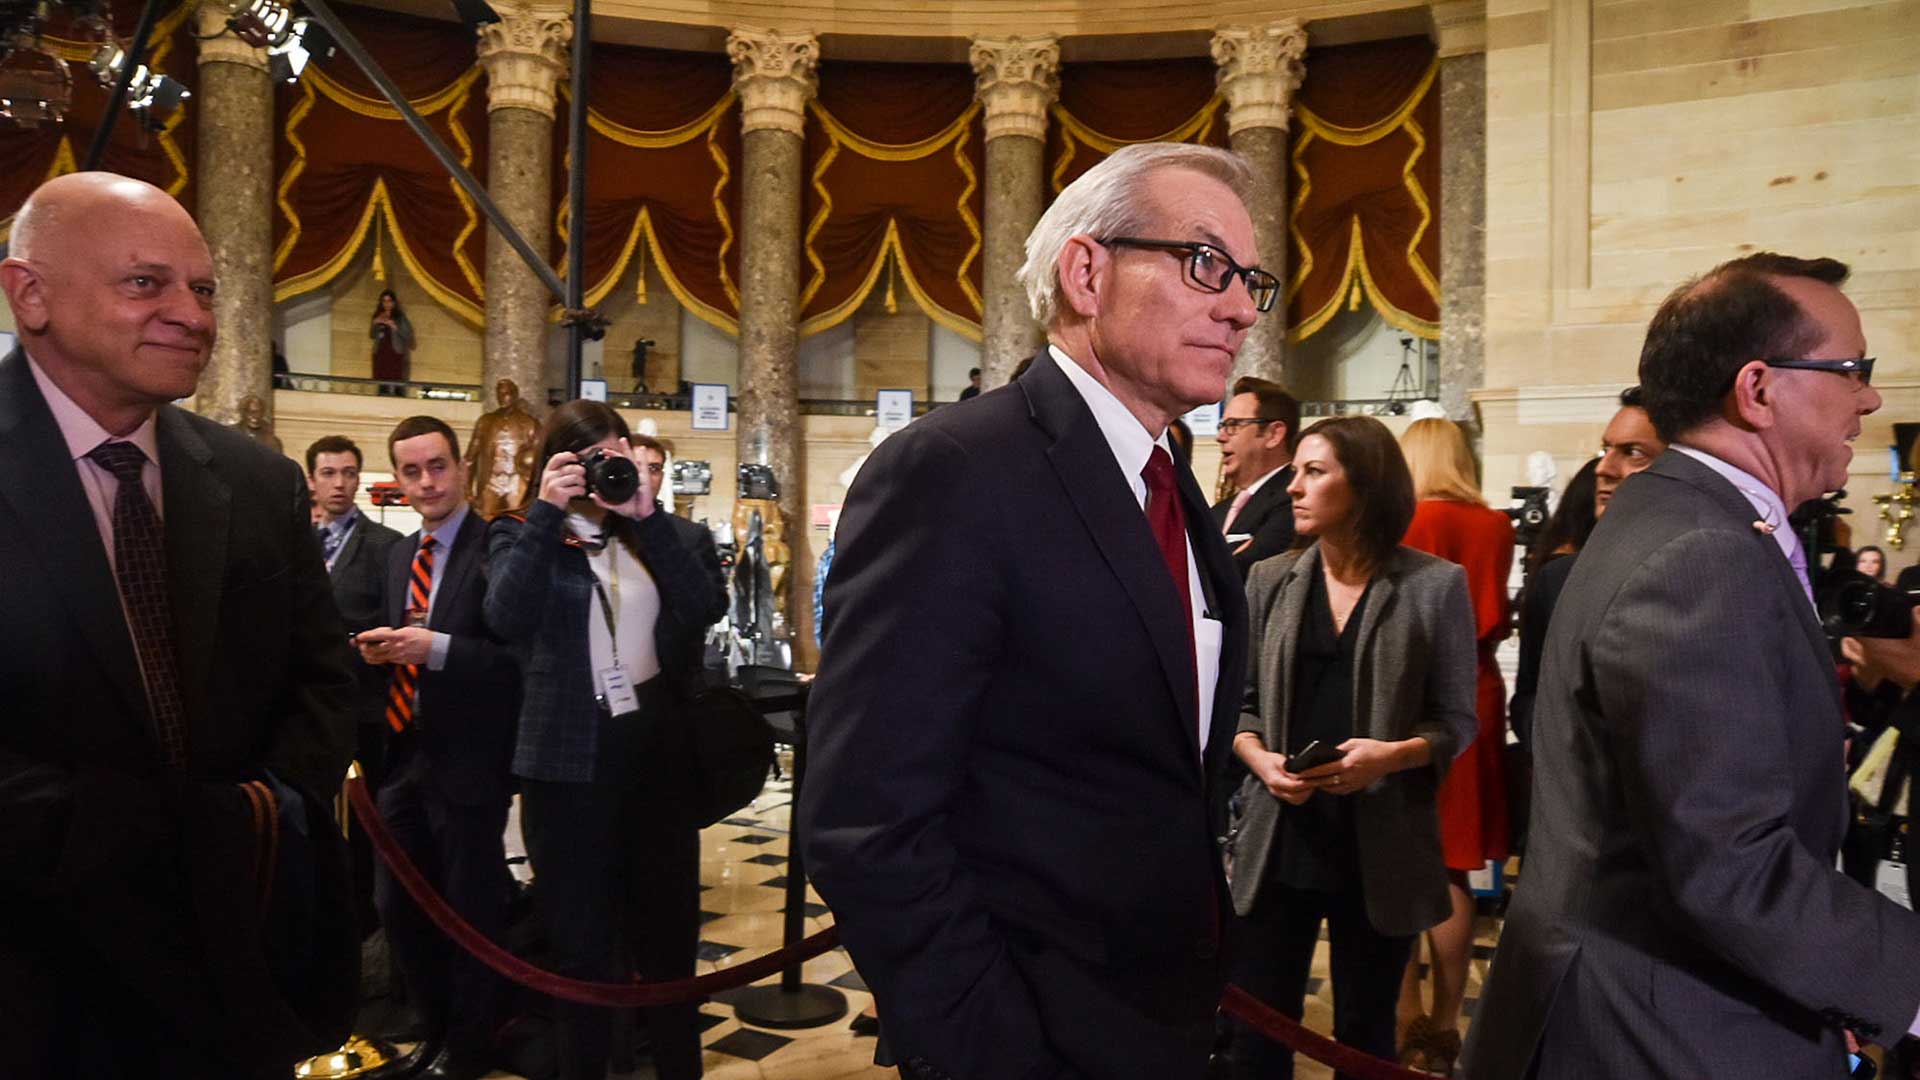 Like many Republicans, Rep. David Schweikert, R-Fountain Hills, praised the the upbeat tone of President Donald Trump’s State of the Union address — a speech many Democrats said ignored or glossed over real problems.